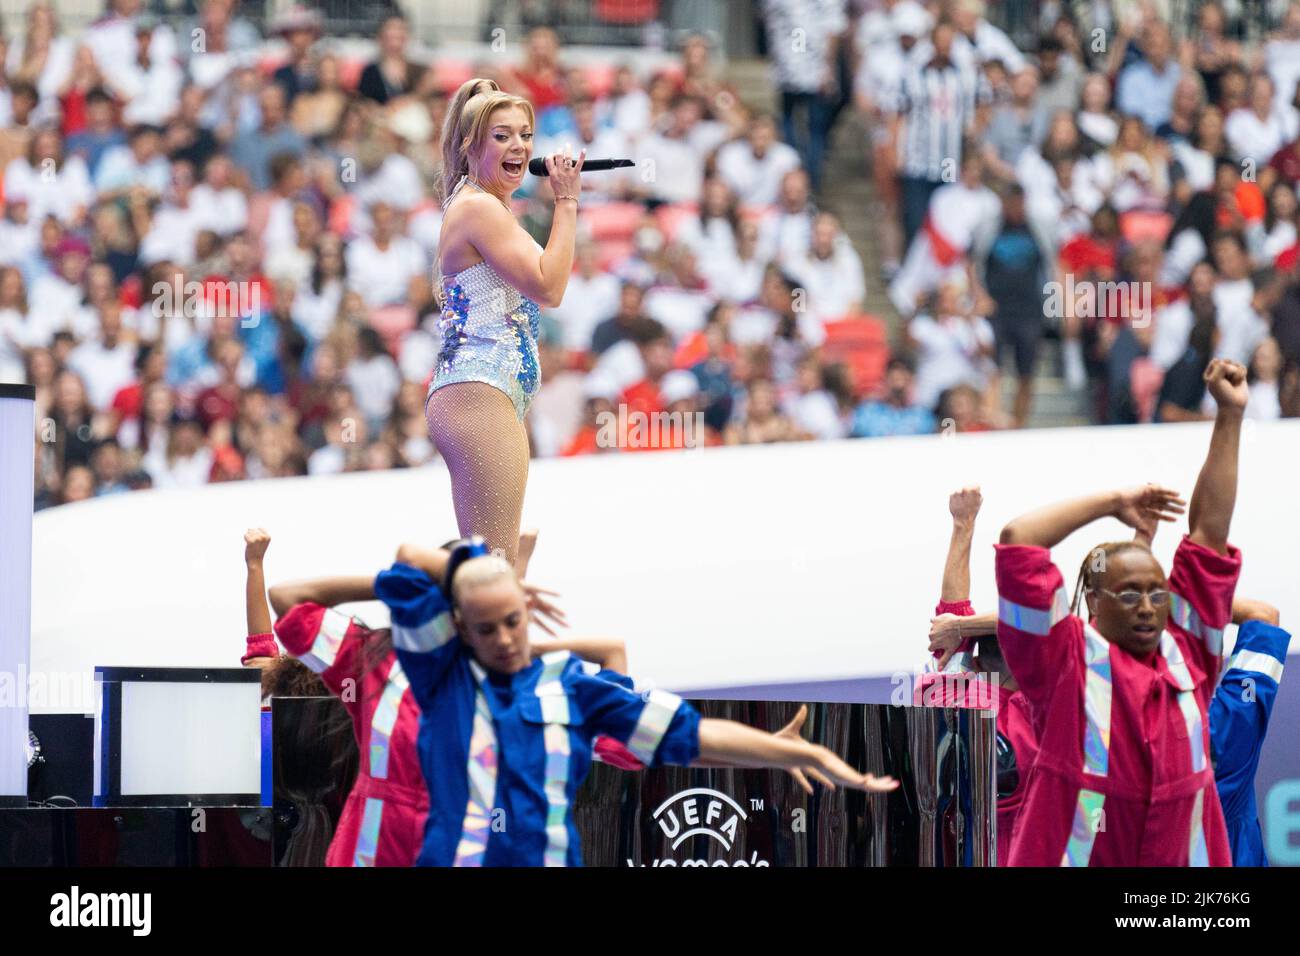 London, UK. 31st July, 2022. Becky Hill performes during the UEFA Womens Euro 2022 Final match between England and Germany at the Wembley Stadium in London, England. (Foto: Sam Mallia/Sports Press Photo/C - ONE HOUR DEADLINE - ONLY ACTIVATE FTP IF IMAGES LESS THAN ONE HOUR OLD - Alamy) Credit: SPP Sport Press Photo. /Alamy Live News Stock Photo